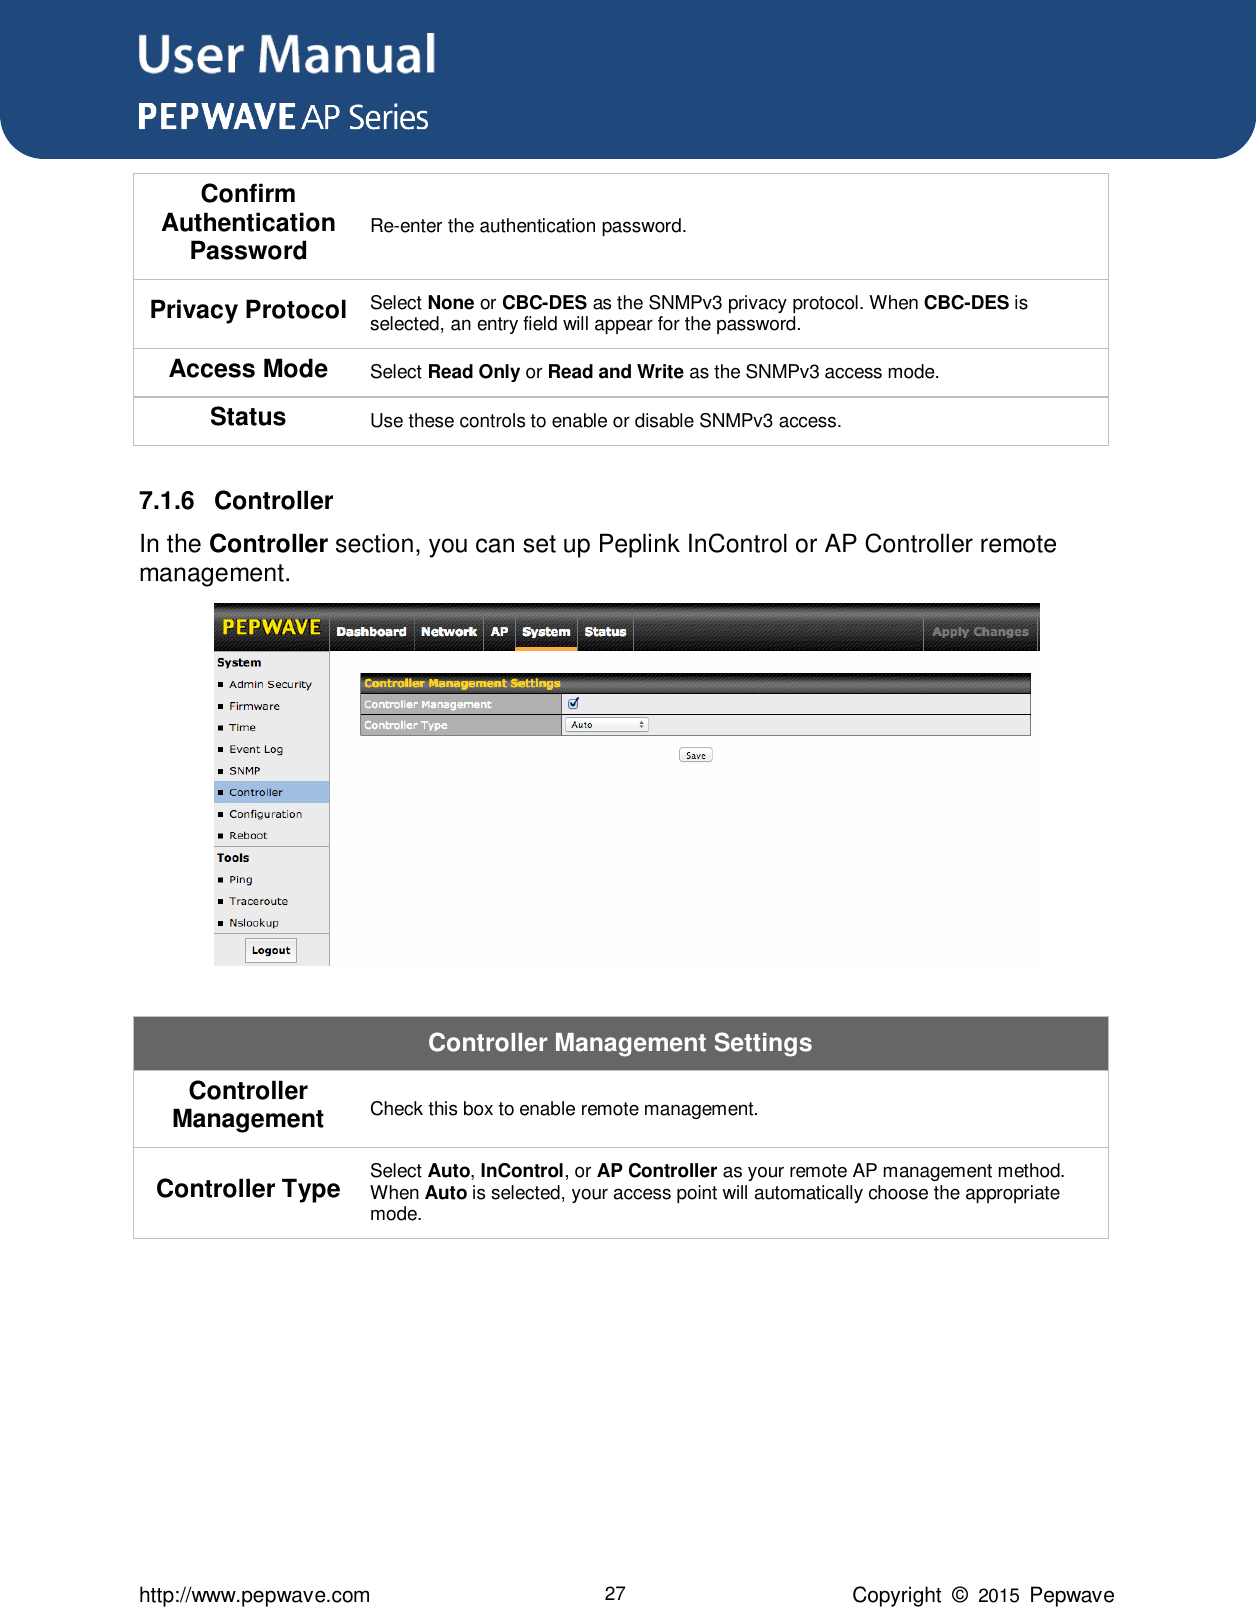 User Manual      http://www.pepwave.com 27 Copyright  ©  2015  Pepwave Confirm Authentication Password Re-enter the authentication password. Privacy Protocol Select None or CBC-DES as the SNMPv3 privacy protocol. When CBC-DES is selected, an entry field will appear for the password.   Access Mode Select Read Only or Read and Write as the SNMPv3 access mode. Status Use these controls to enable or disable SNMPv3 access.  7.1.6  Controller In the Controller section, you can set up Peplink InControl or AP Controller remote management.           Controller Management Settings Controller Management Check this box to enable remote management. Controller Type Select Auto, InControl, or AP Controller as your remote AP management method. When Auto is selected, your access point will automatically choose the appropriate mode.        